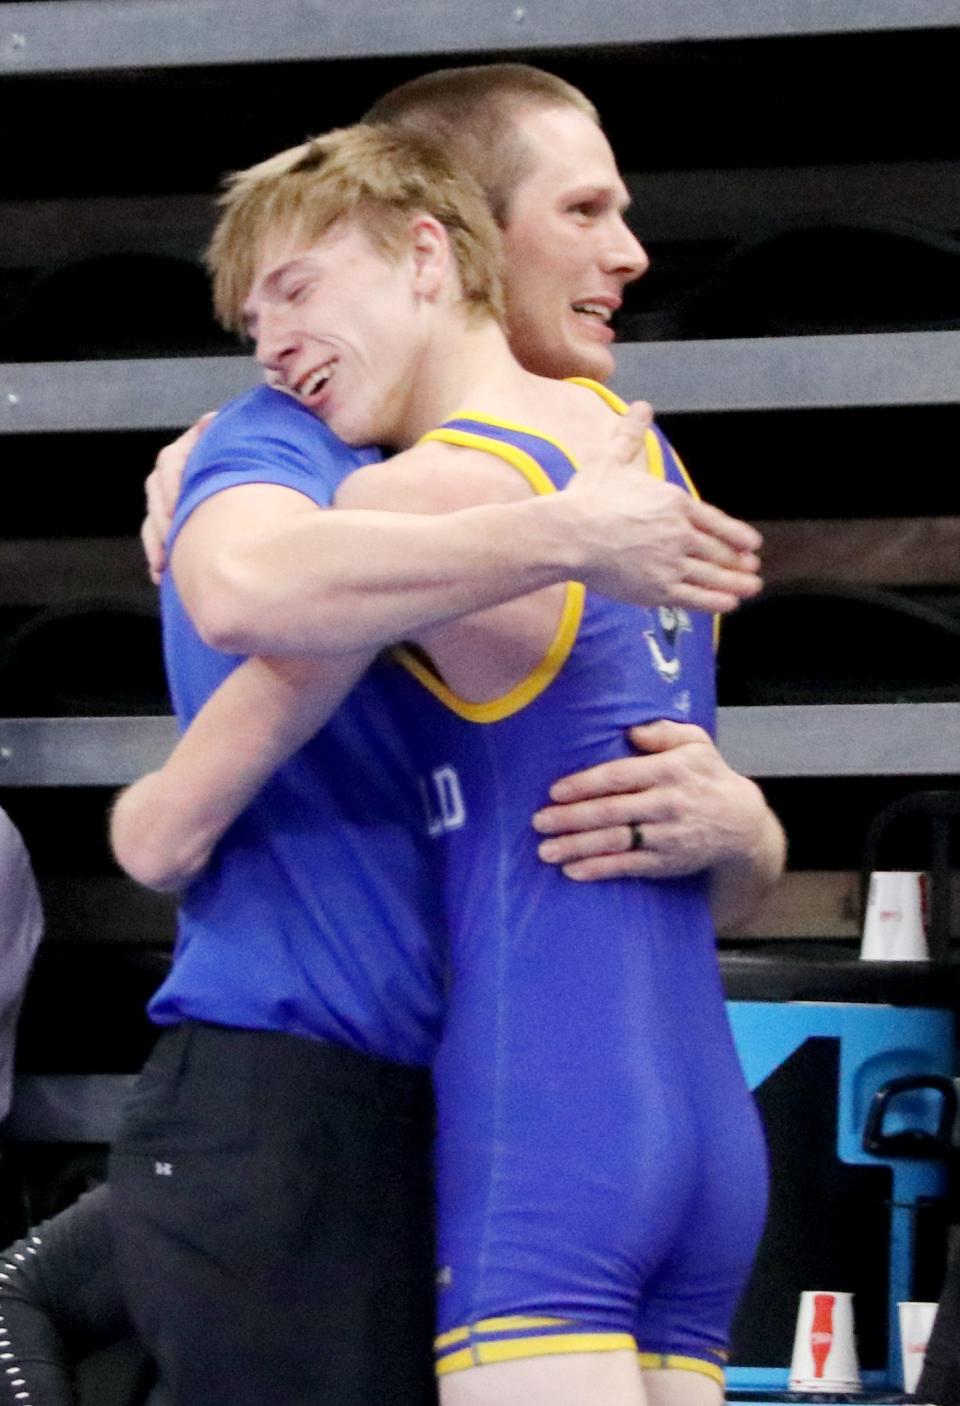 Redfield senior Brady Risetter celebrates after winning the Class B 103-pound championship on Saturday, Feb. 24, 2023 in the South Dakota State Wrestling Championships at The Monument in Rapid City.